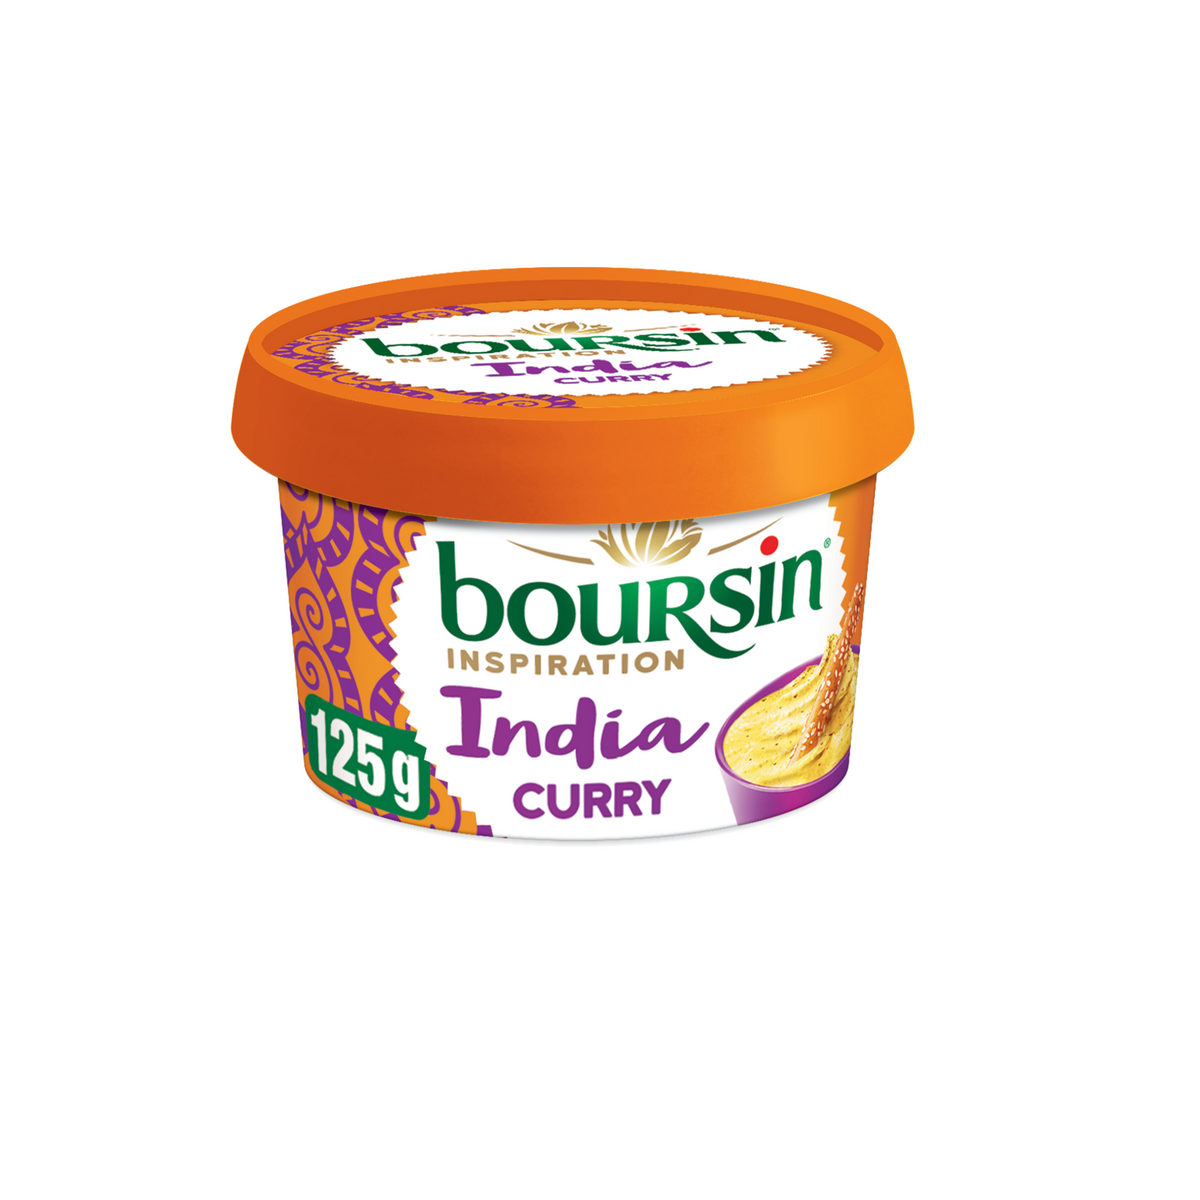 BOURSIN Fromage à tartiner inspiration india curry 125g